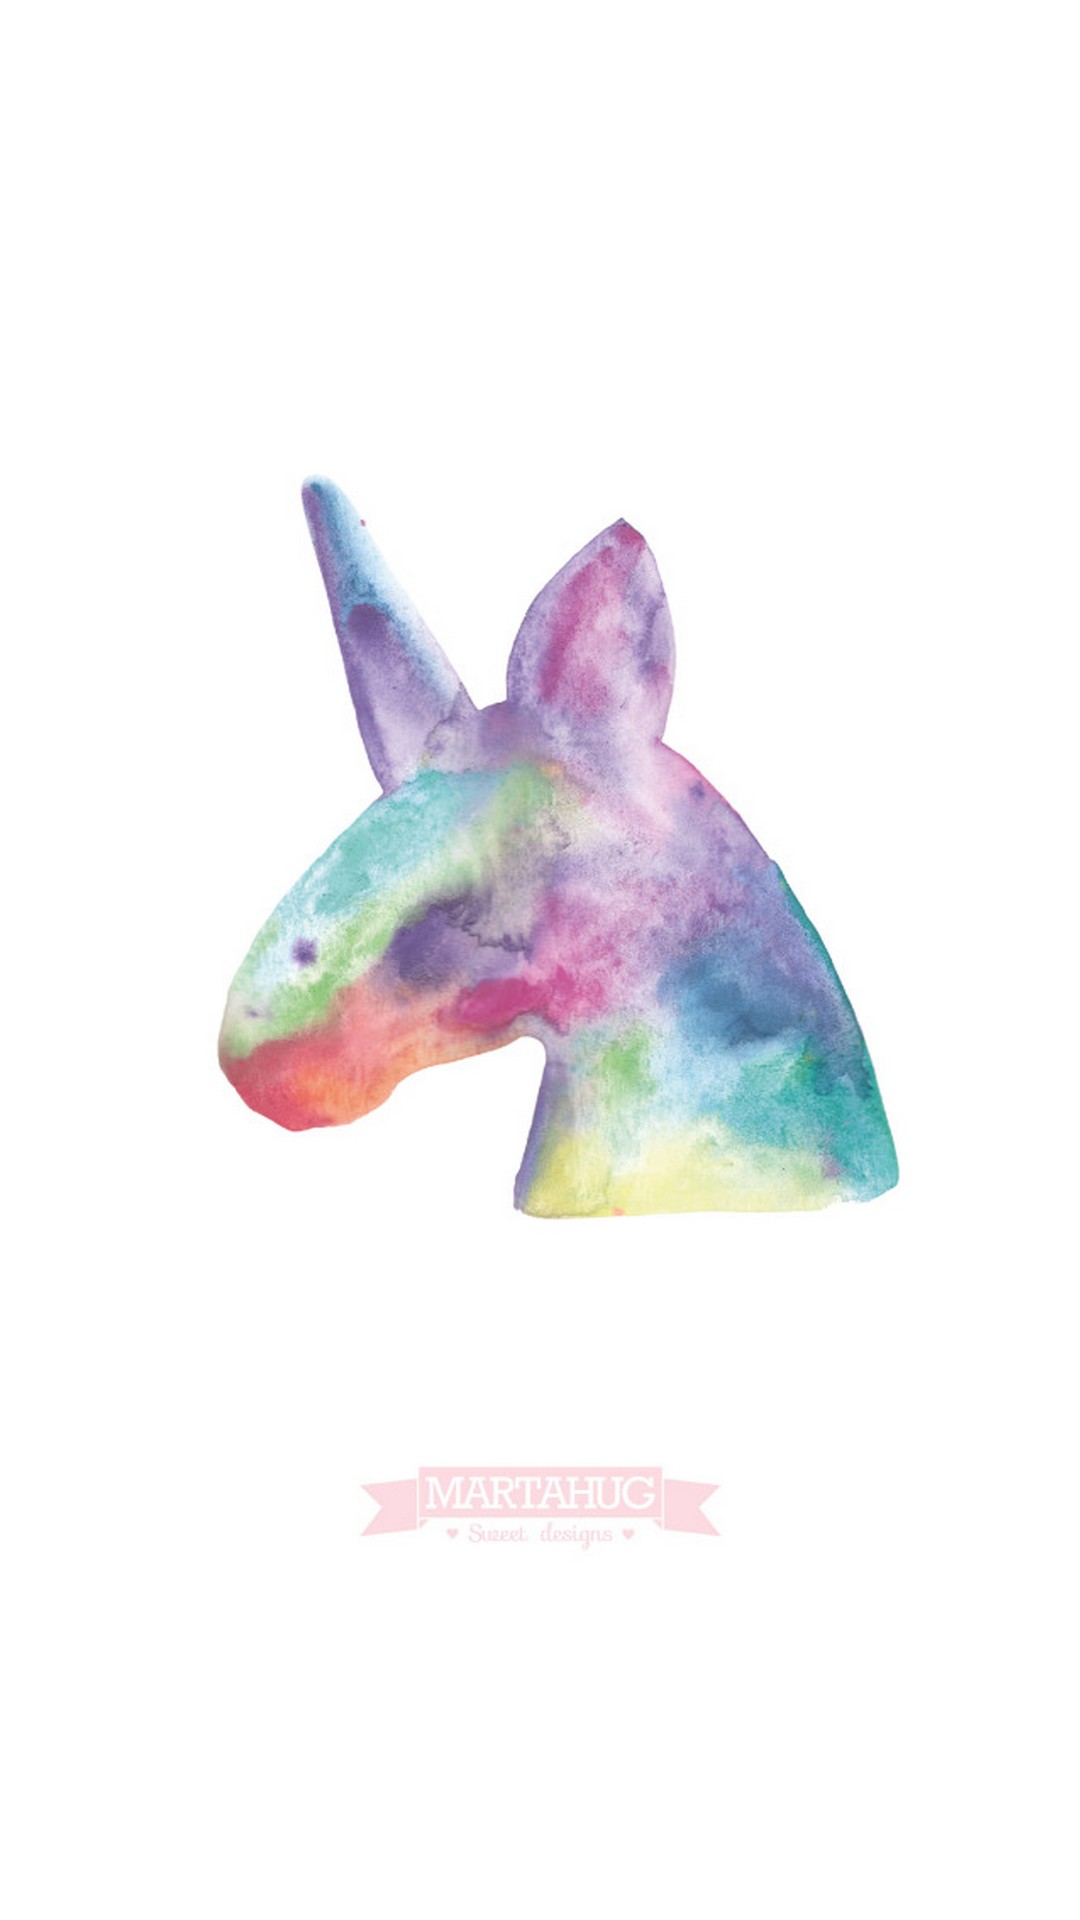 Cute Unicorn iPhone Screen Lock Wallpaper With high-resolution 1080X1920 pixel. You can set as wallpaper for Apple iPhone X, XS Max, XR, 8, 7, 6, SE, iPad. Enjoy and share your favorite HD wallpapers and background images